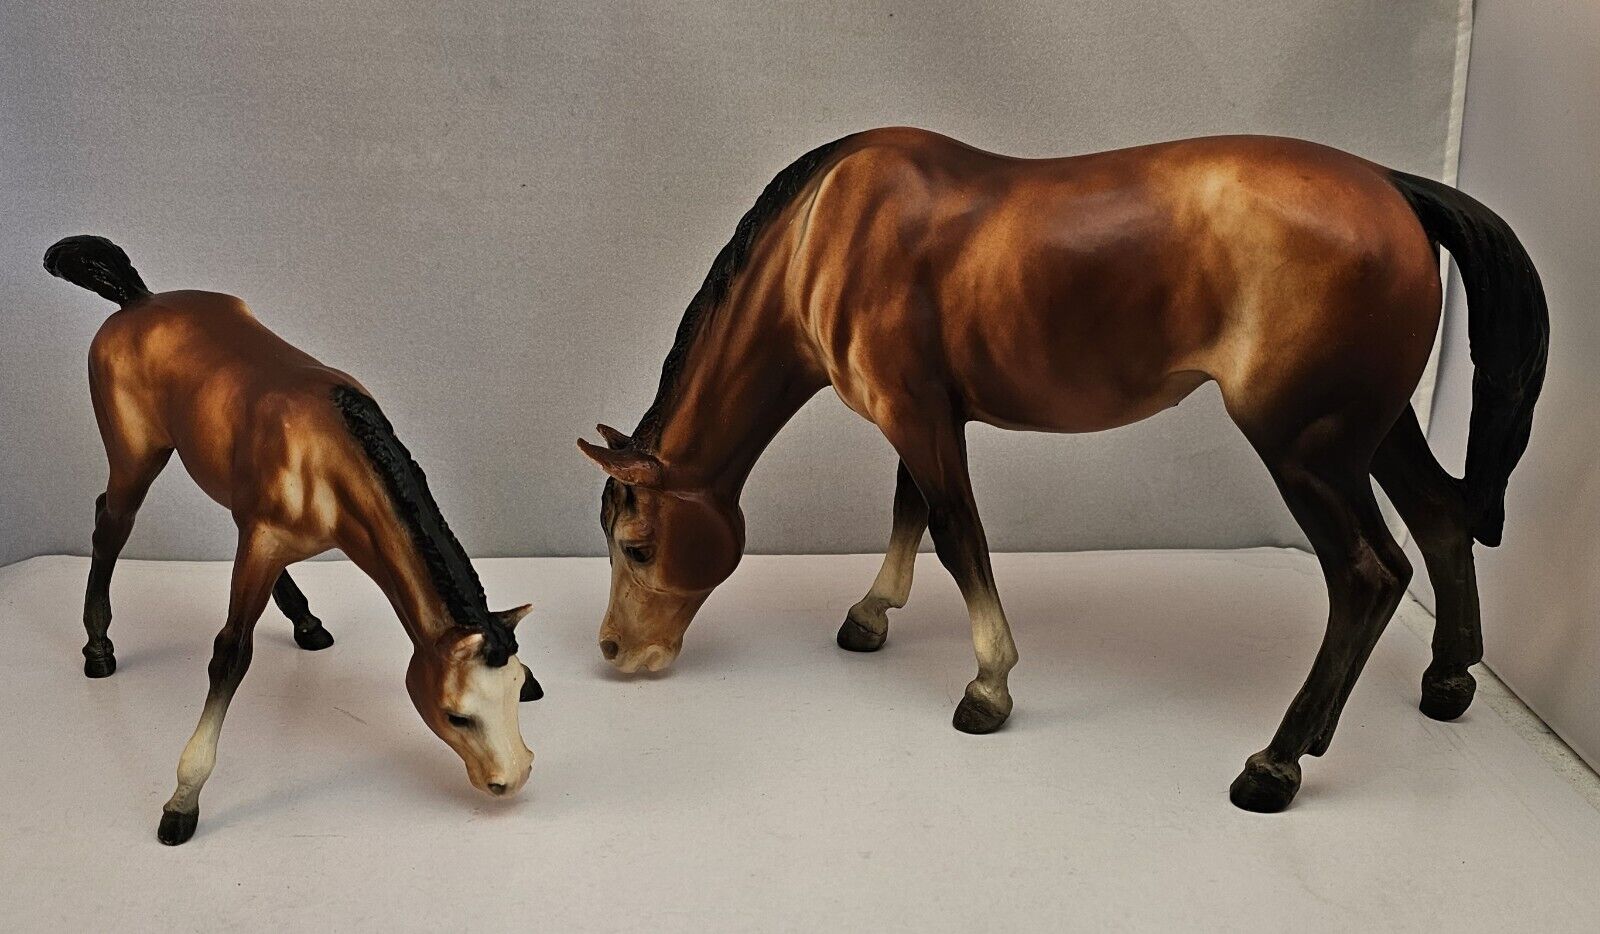 Lot of 2 - Vintage Breyer Grazing Mare (#141) and Grazing Foal (#151) Bay